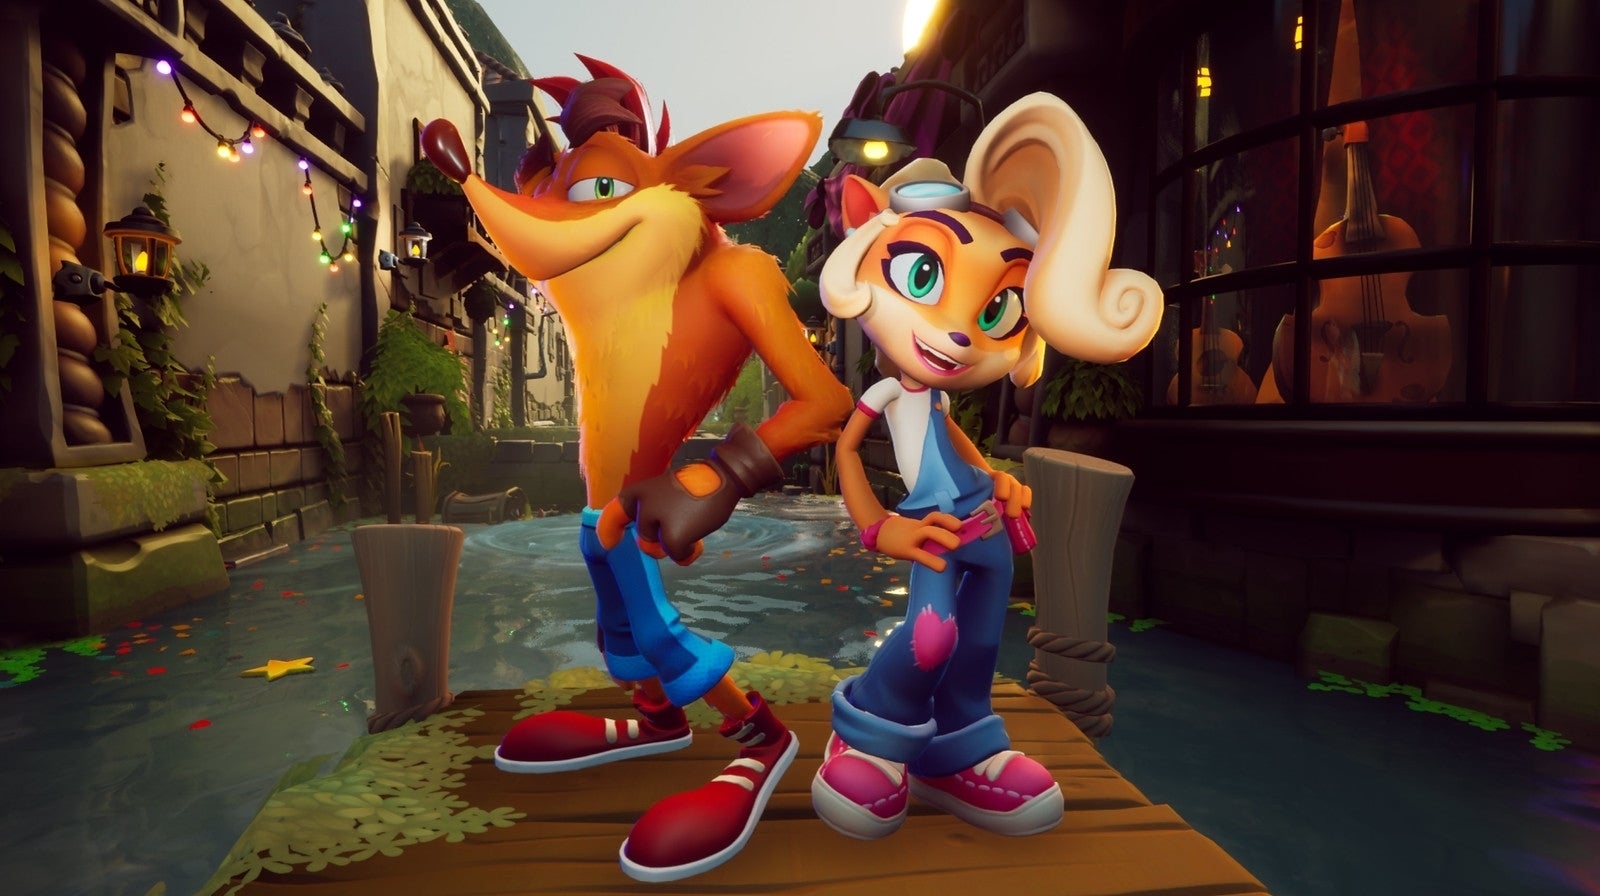 Image for Crash Bandicoot 4: It's About Time coming to PS5, Xbox Series X/S and Nintendo Switch in March, PC later